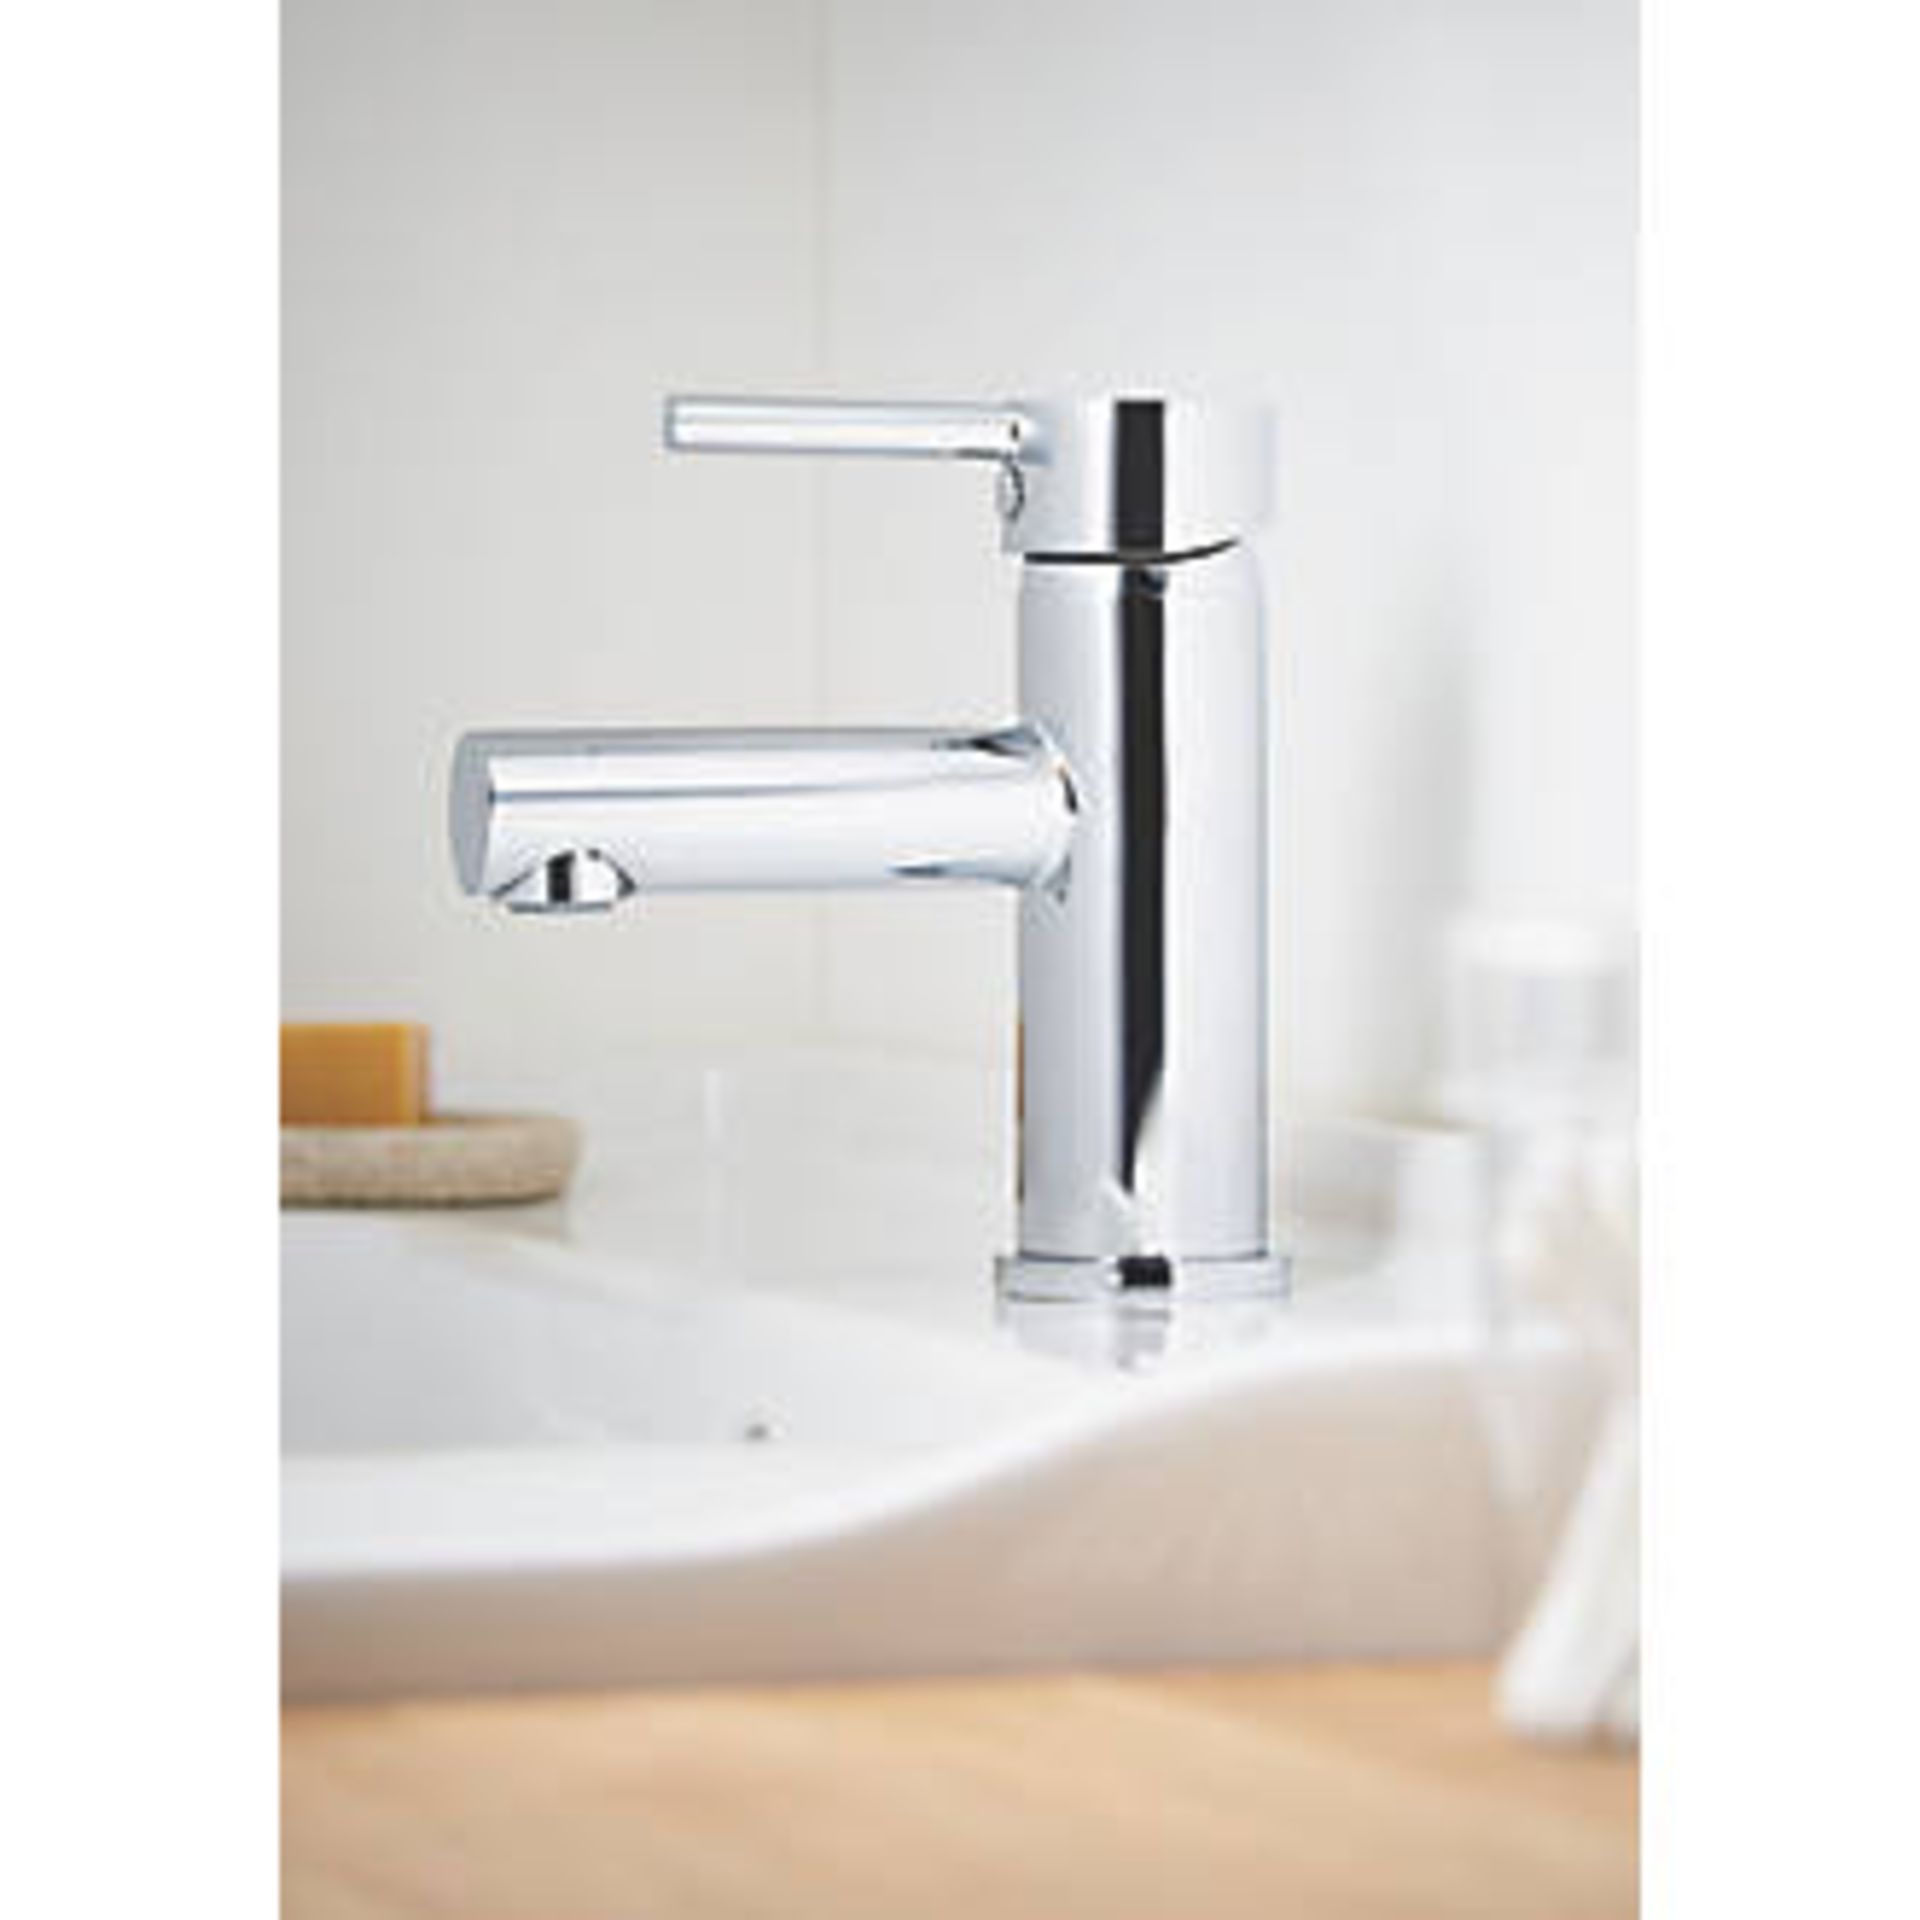 (AQ16) LAZU SINGLE LEVER BASIN MIXER. Ceramic Discs Suitable for High & Low Pressure Systems ...